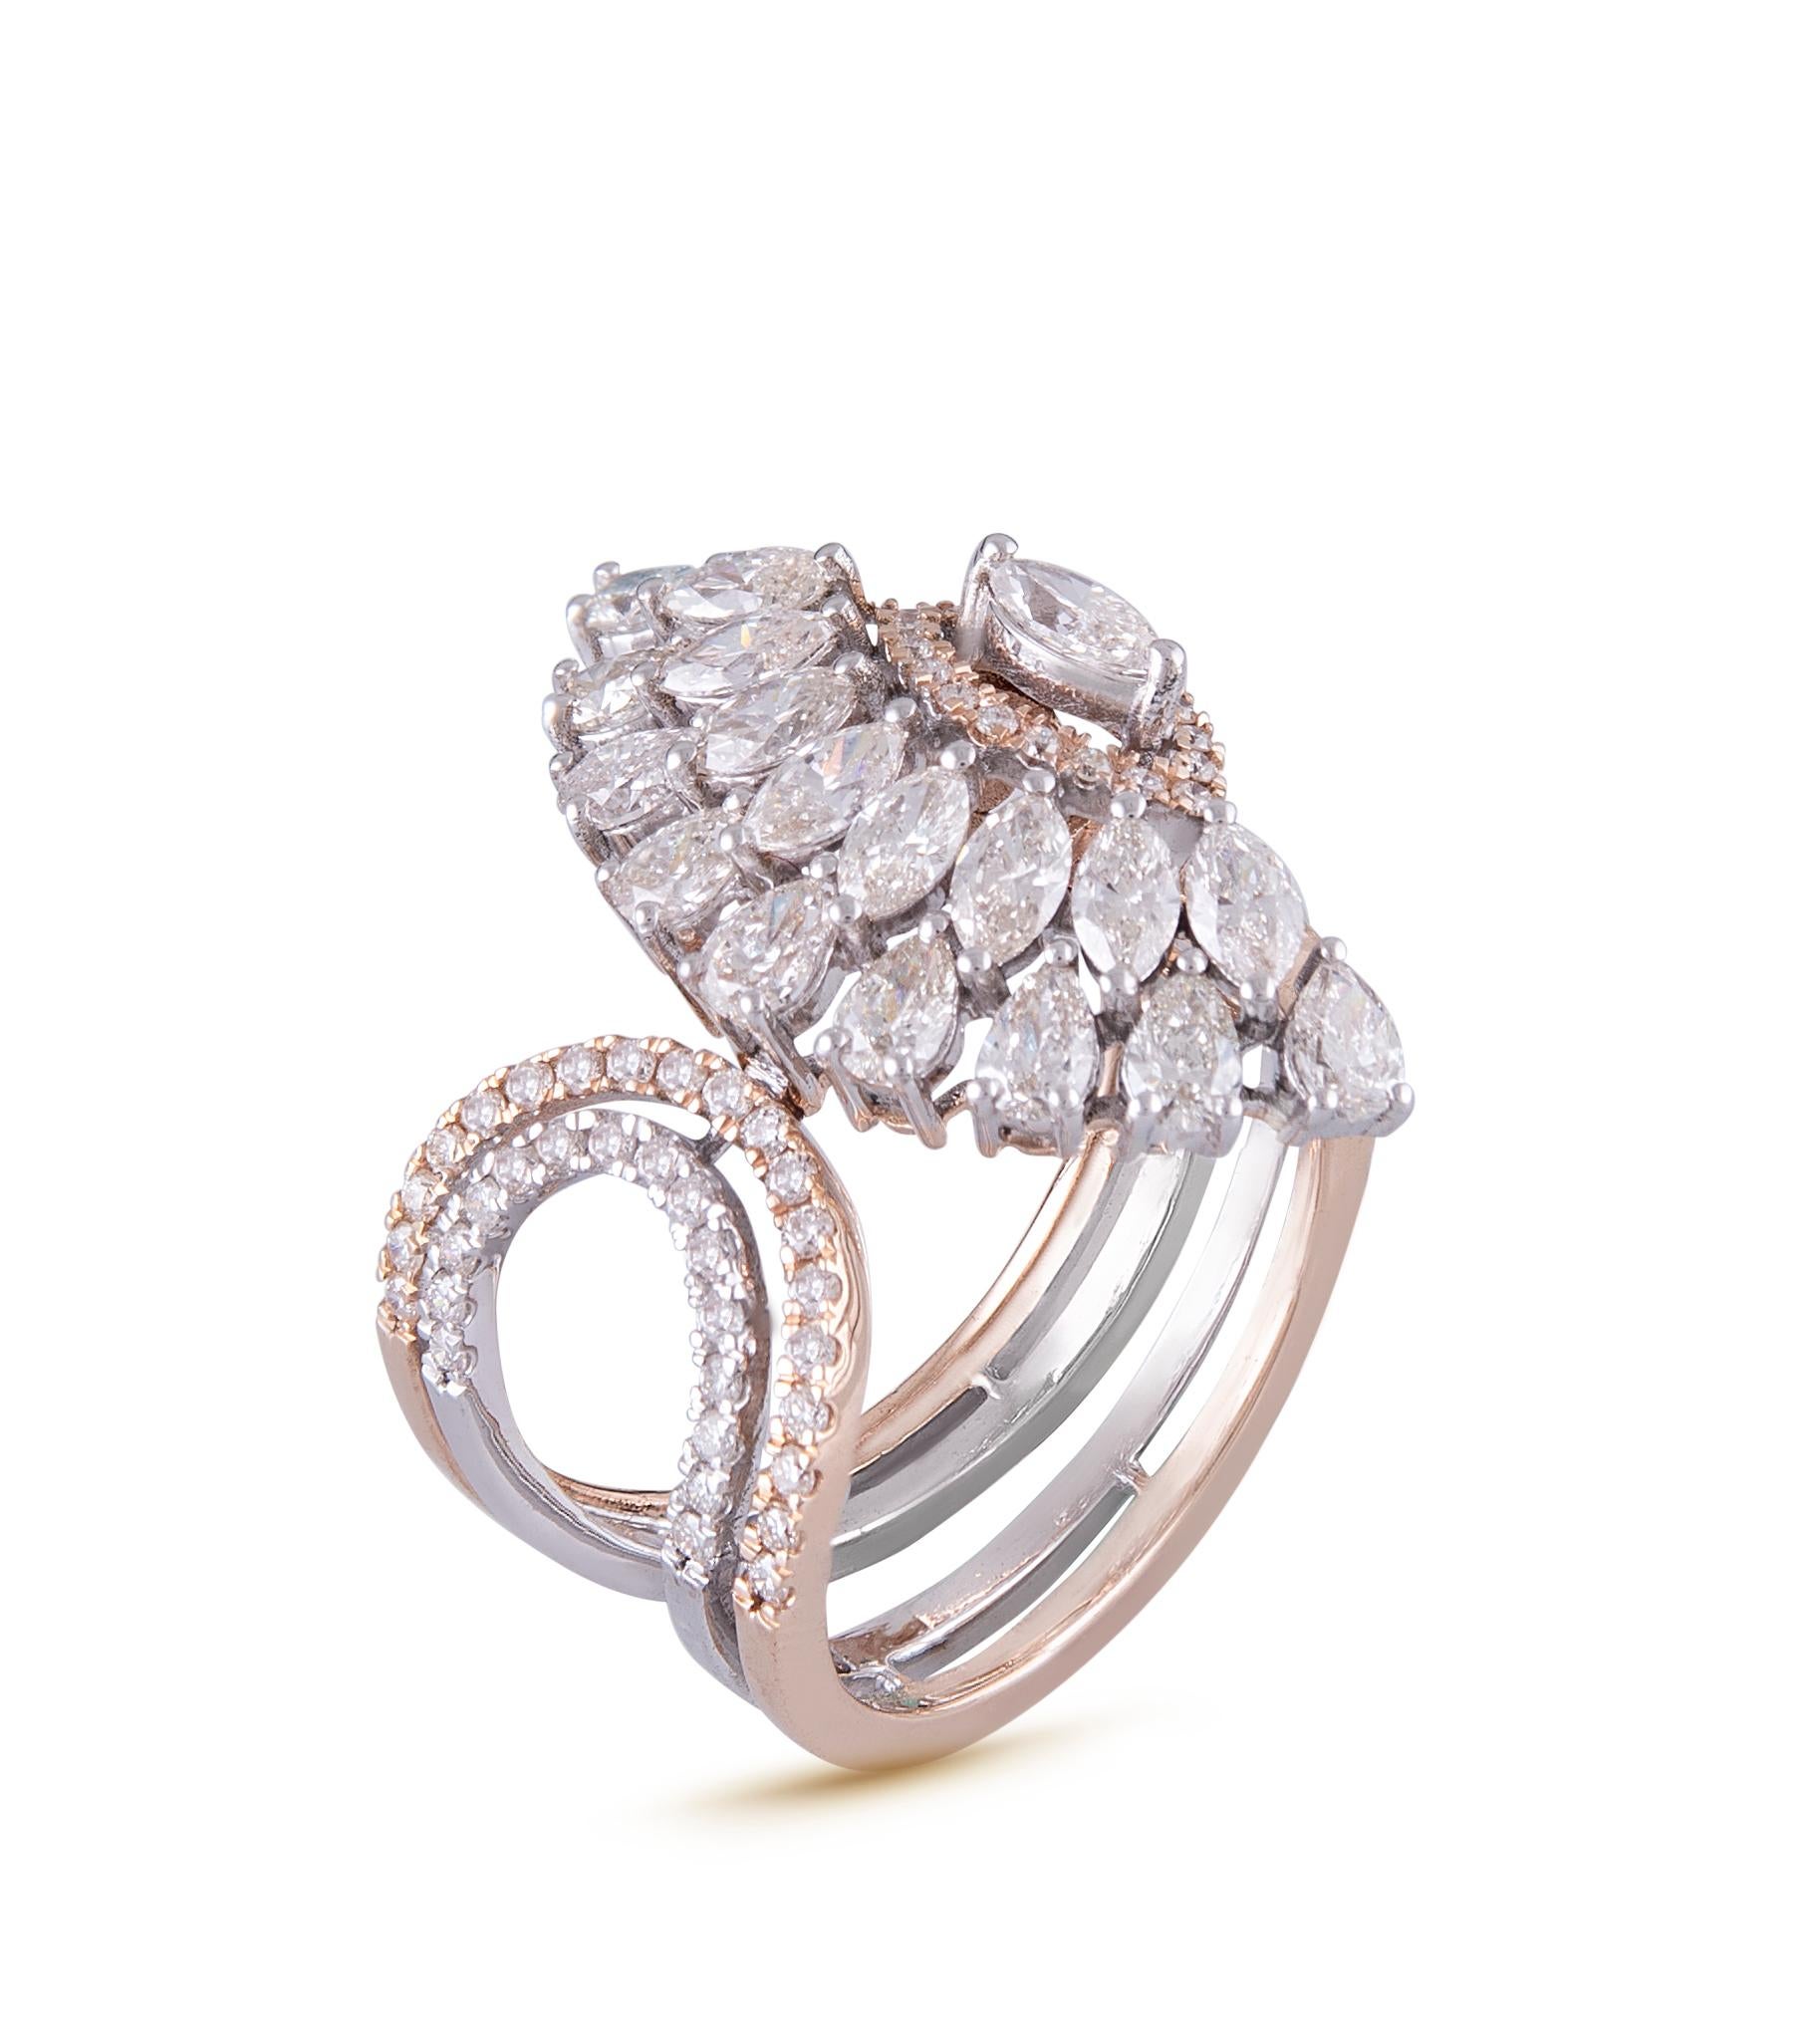 Unique cocktail rings with diamonds and jewels – Raymond Lee Jewelers